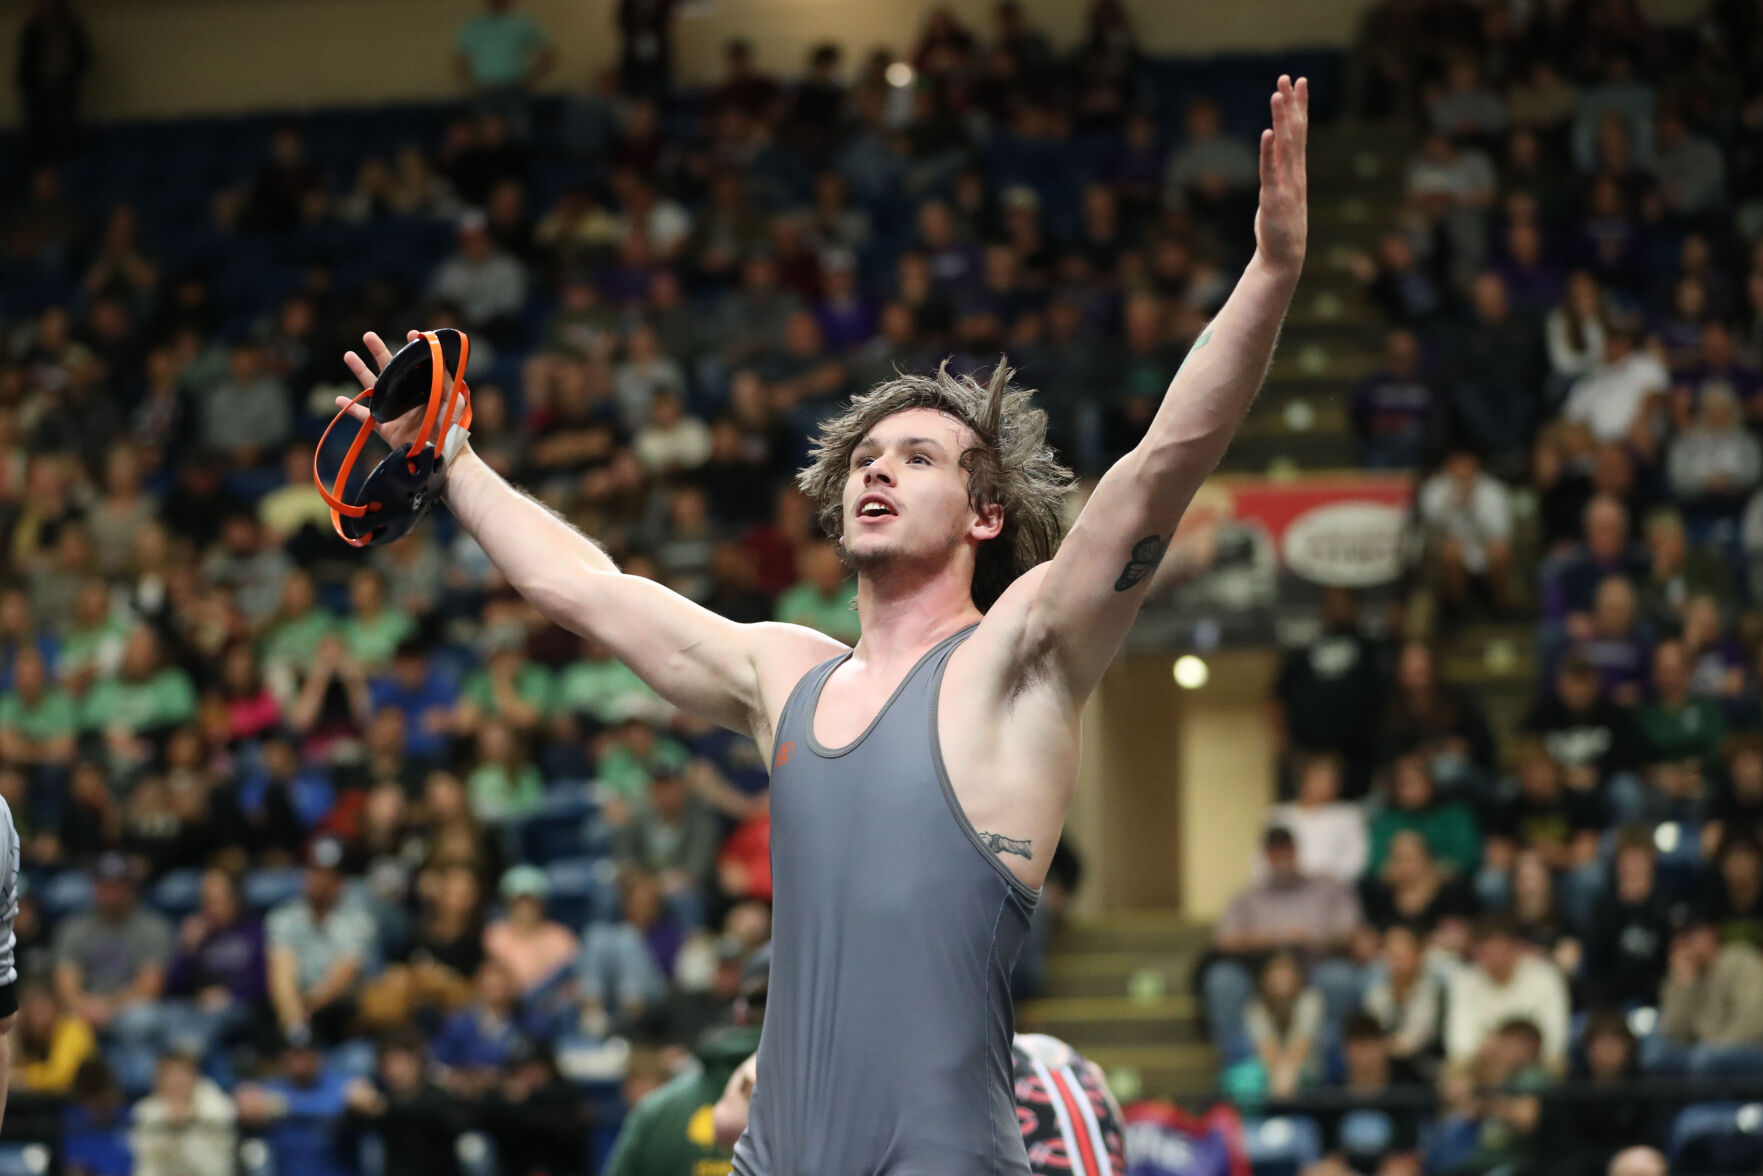 Thomas Potter Secures Fourth State Title at VHSL Class 2 Wrestling Tournament